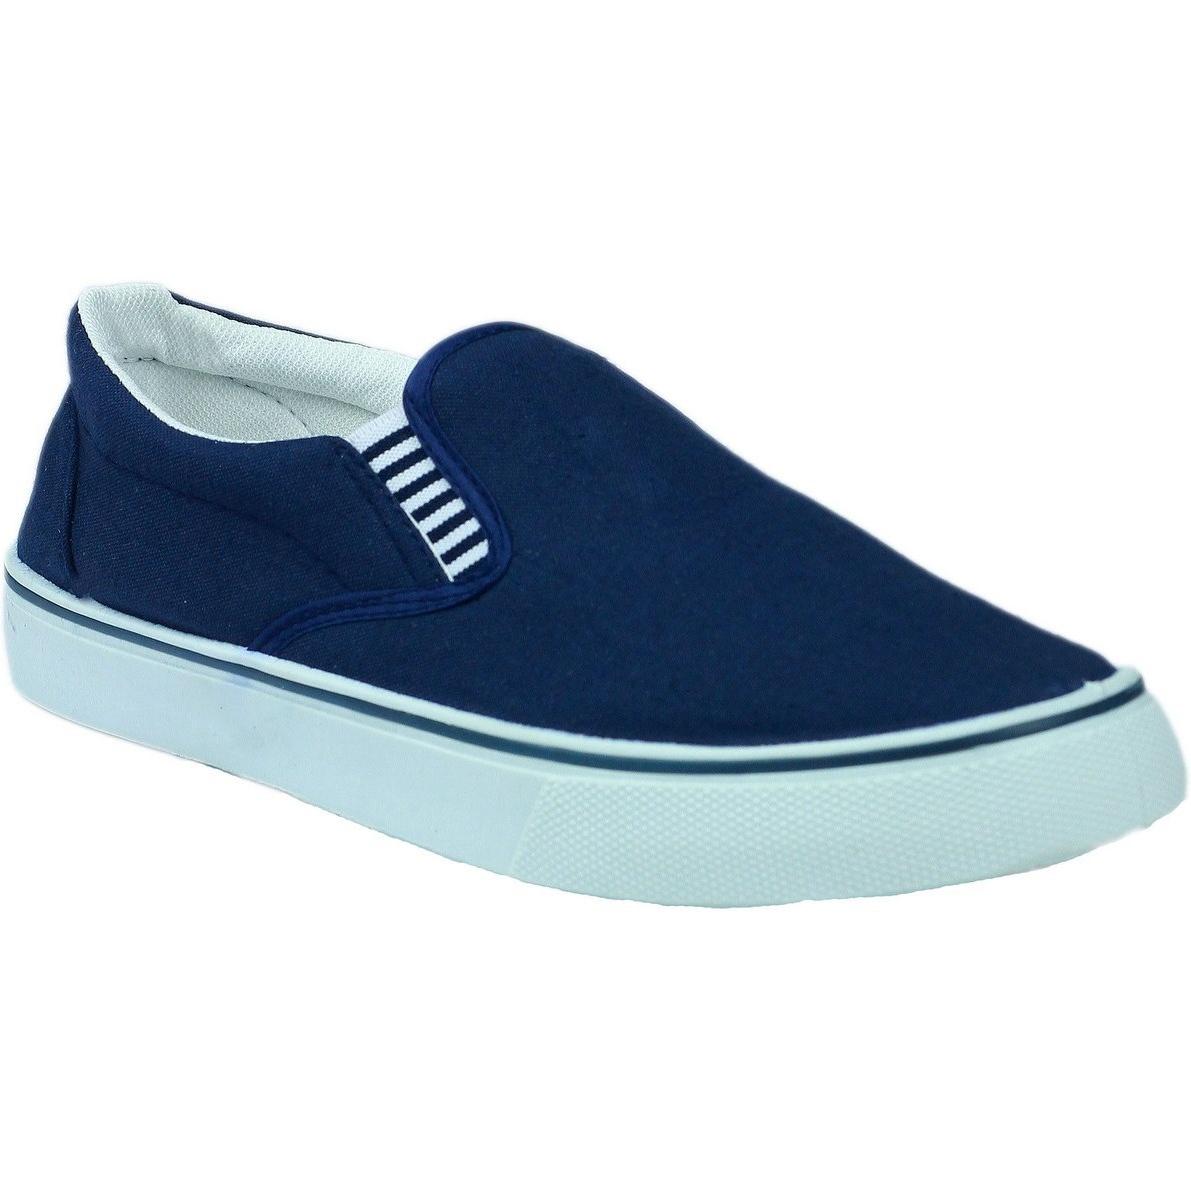 Yachtmaster Gusset Trainers